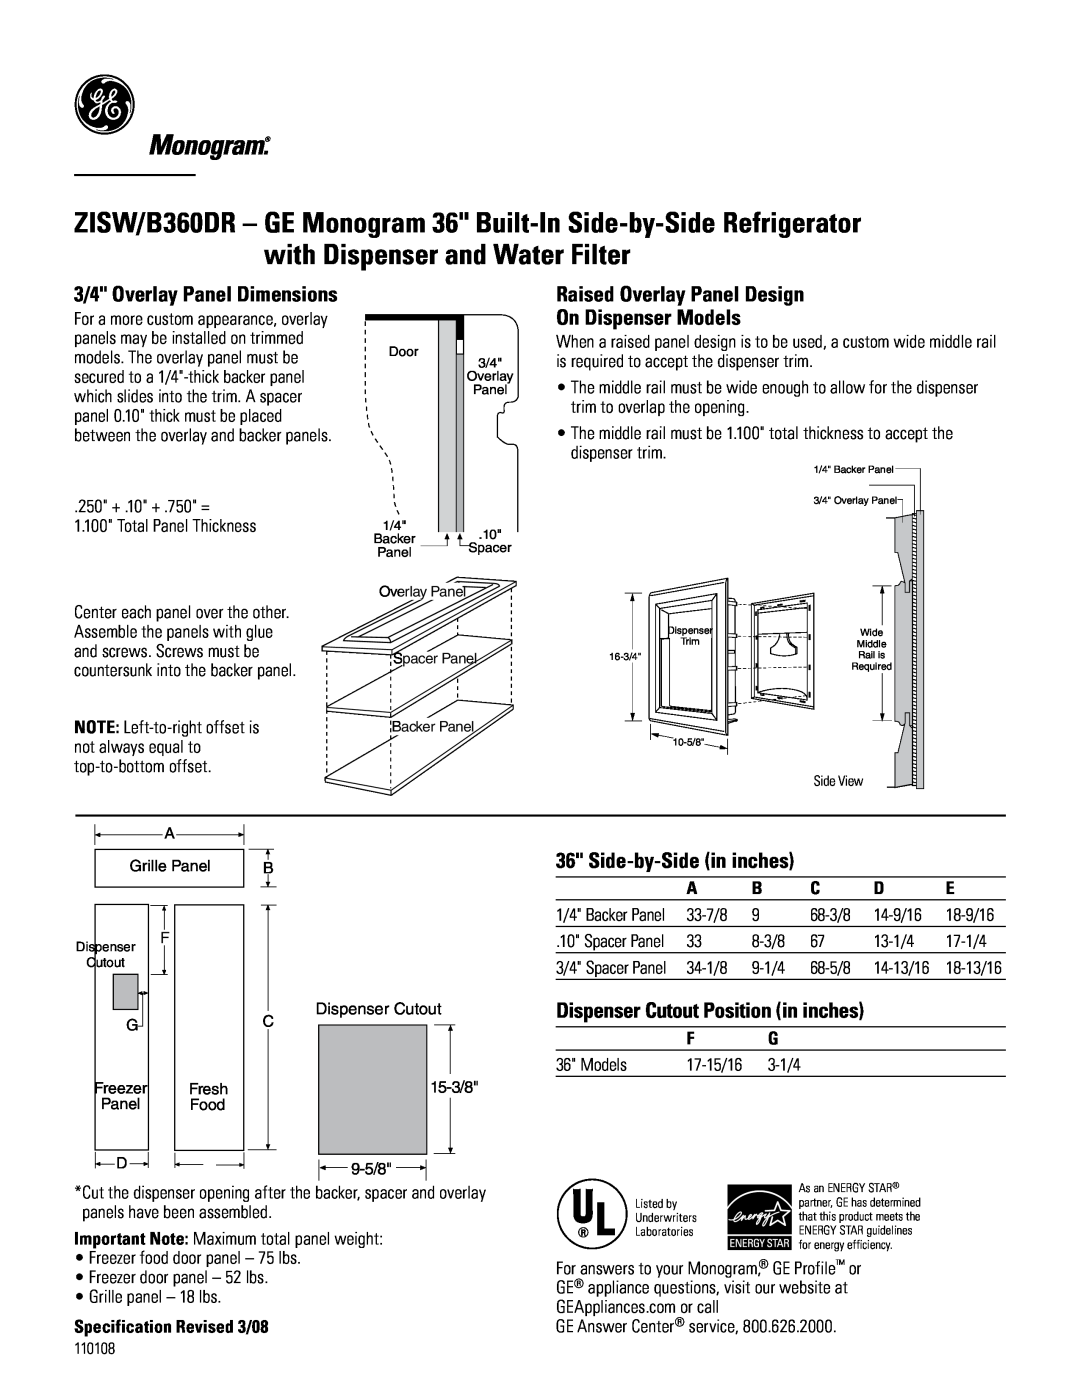 GE ZISW/B360DR Raised Overlay Panel Design On Dispenser Models, Side-by-Side in inches, 3/4 Overlay Panel Dimensions 